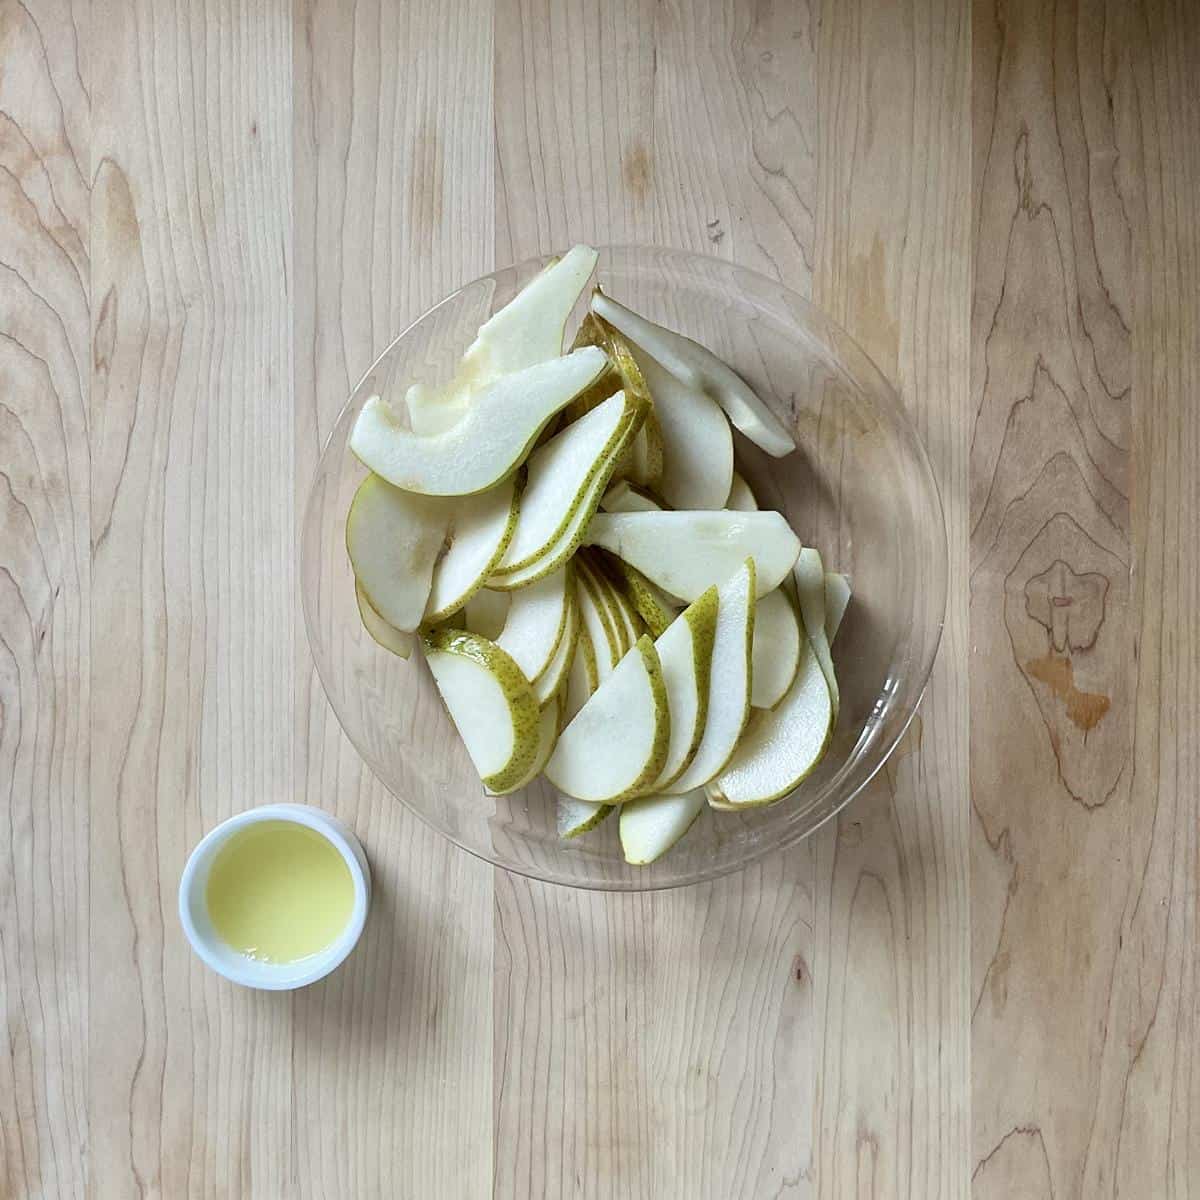 Sliced pears on a shallow dish next to a small dish of lemon juice.